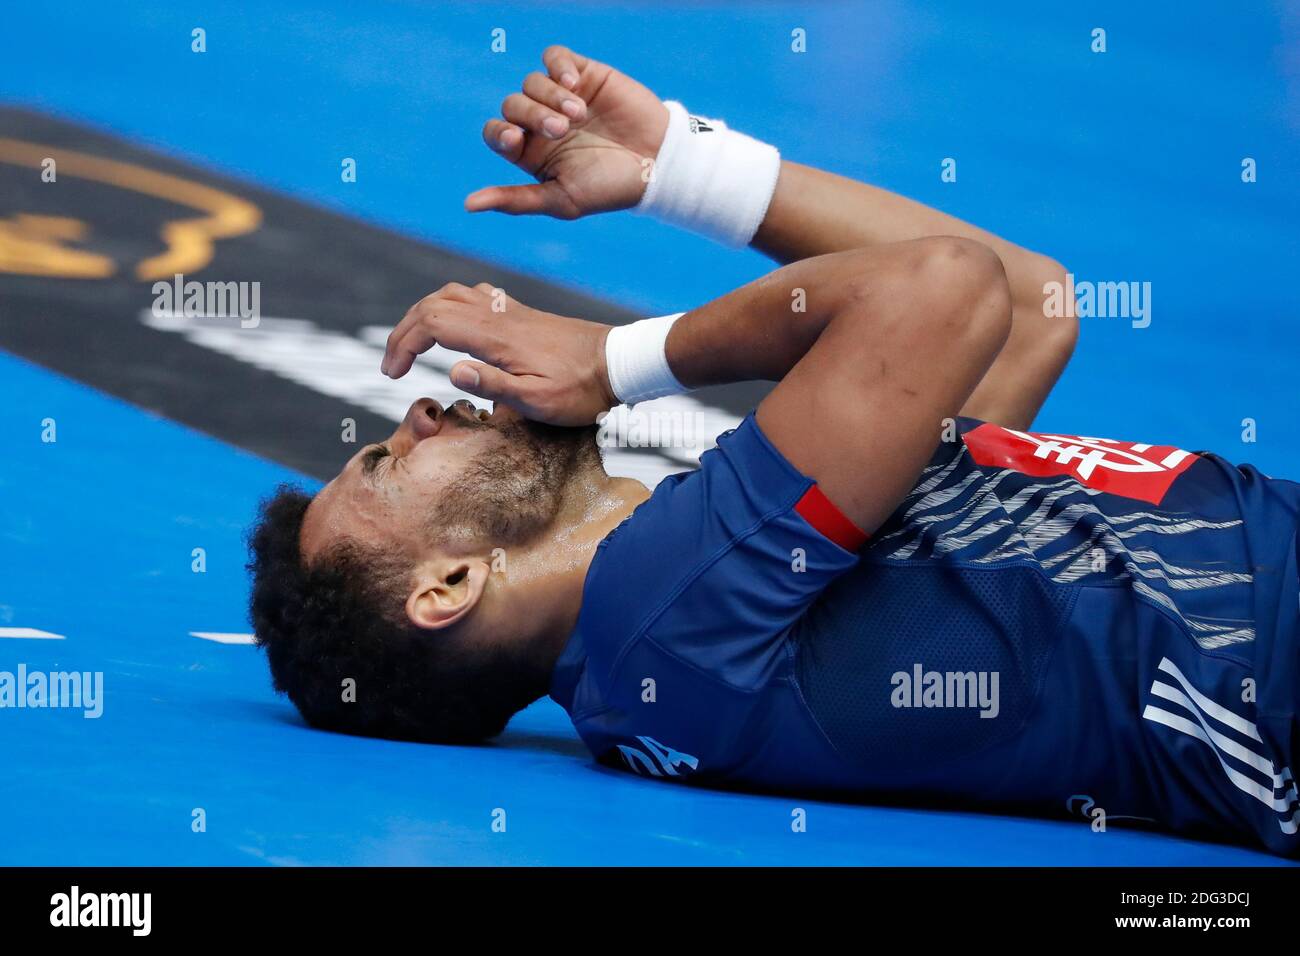 France's Adrien Dipanda during Group A First Round game of the 2017 Handball World Championship France vs Brazil in AccorHotels Arena, Paris, France, on January 11th, 2017. France won 31-16. Photo by Henri Szwarc/ABACAPRESS.COM Stock Photo